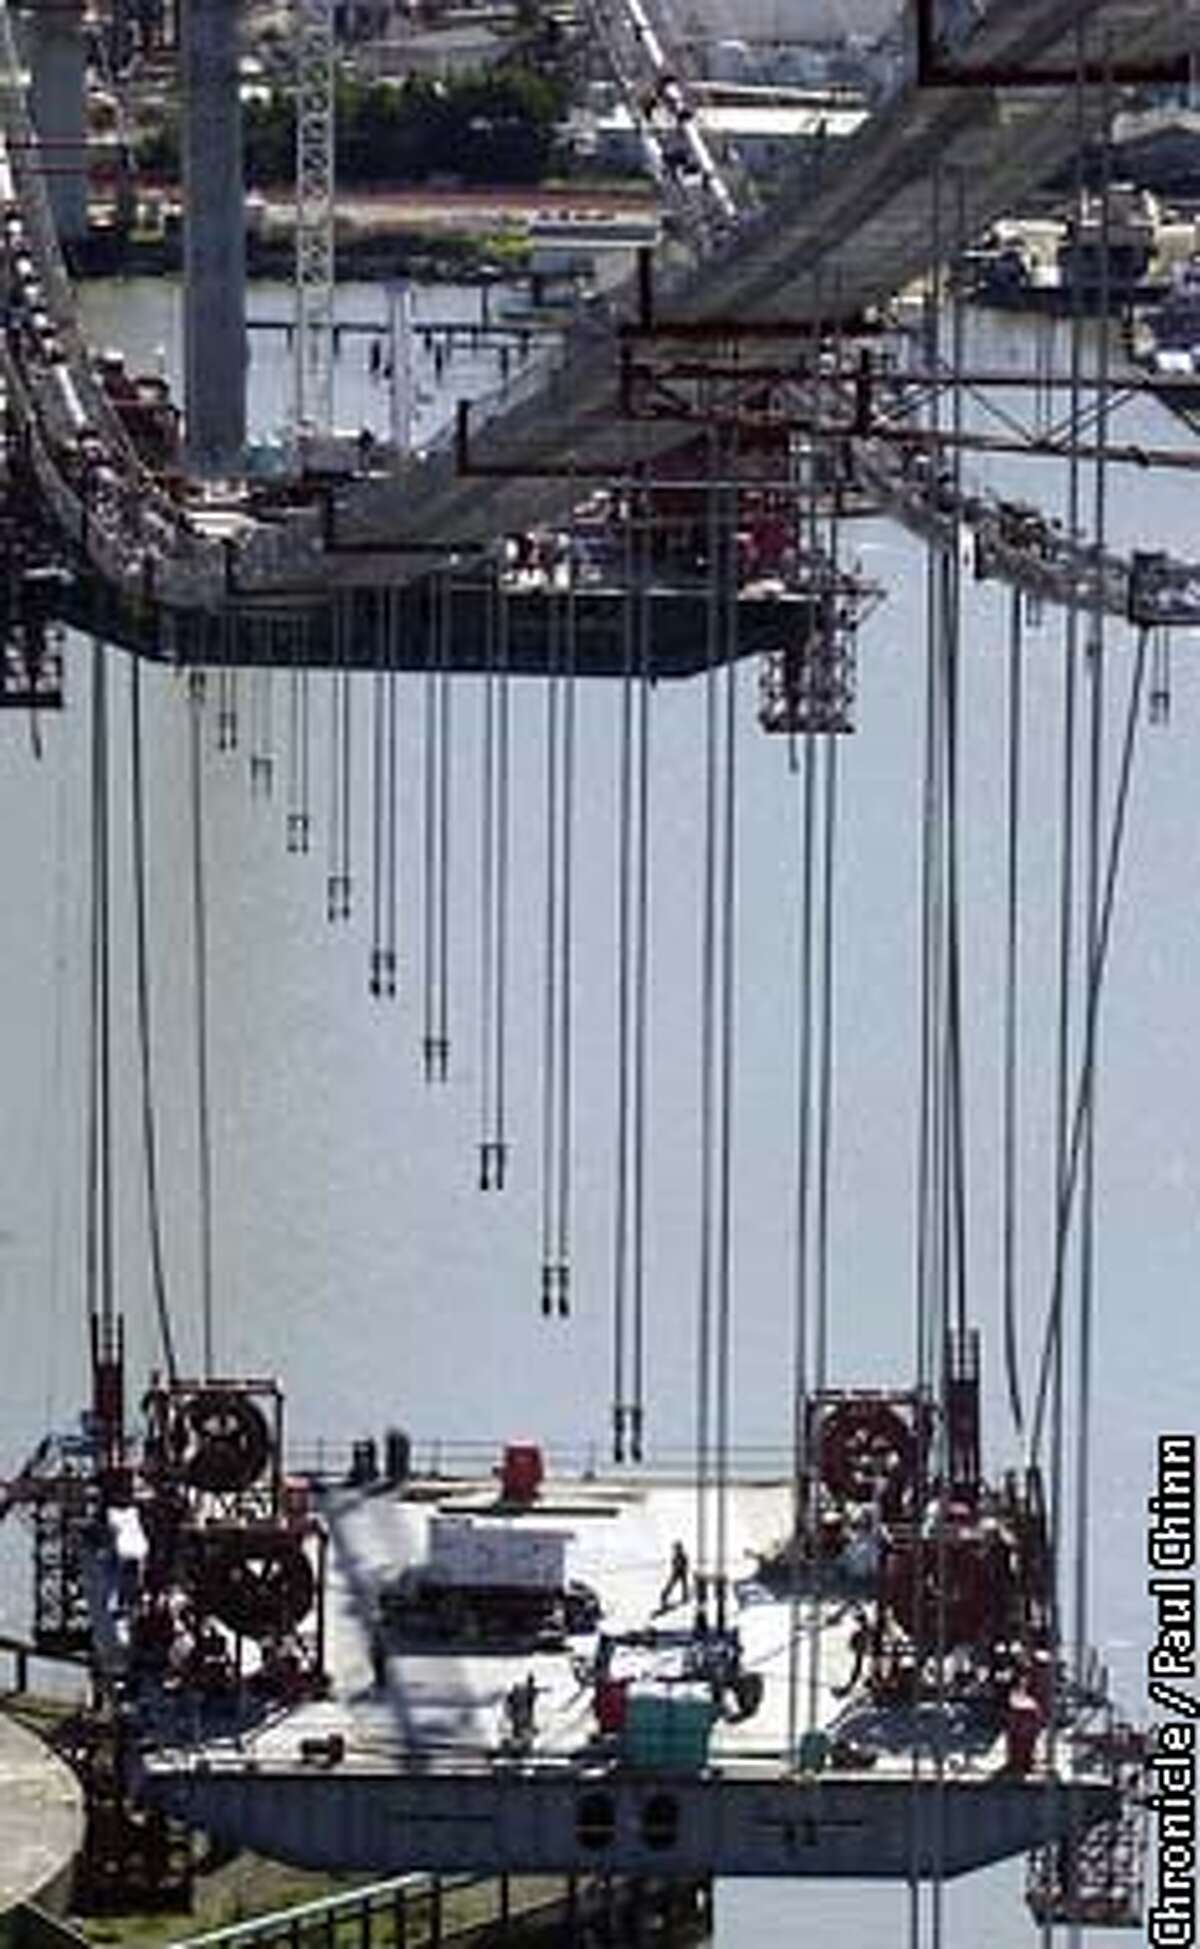 The center sections of roadway are being lifted into place on the new suspension-style Carquinez Bridge. PAUL CHINN/SF CHRONICLE